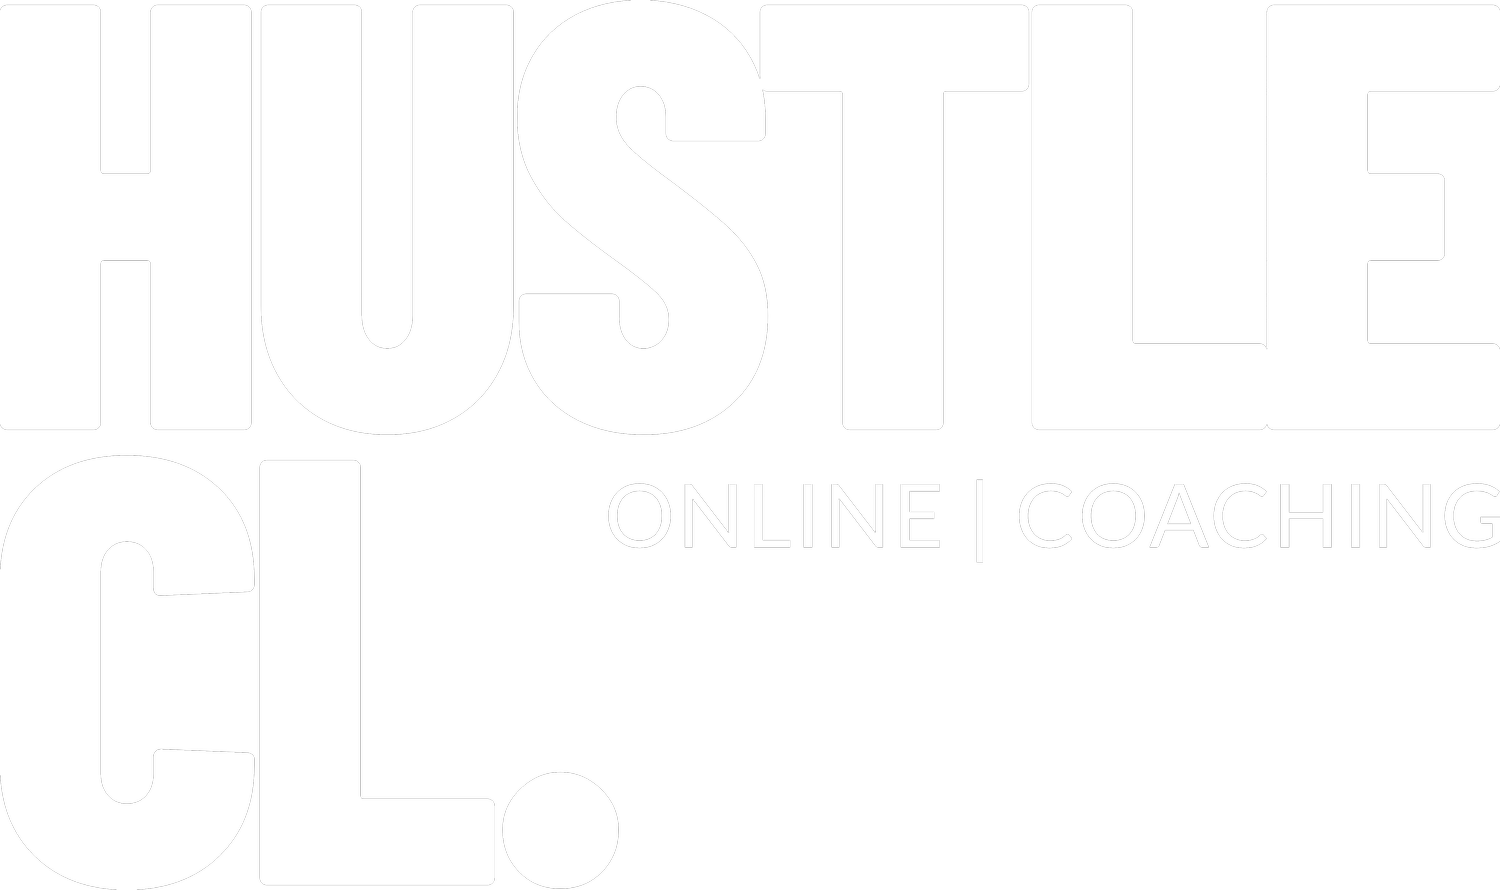 Hustle Club - Online Coaching and Personal Training